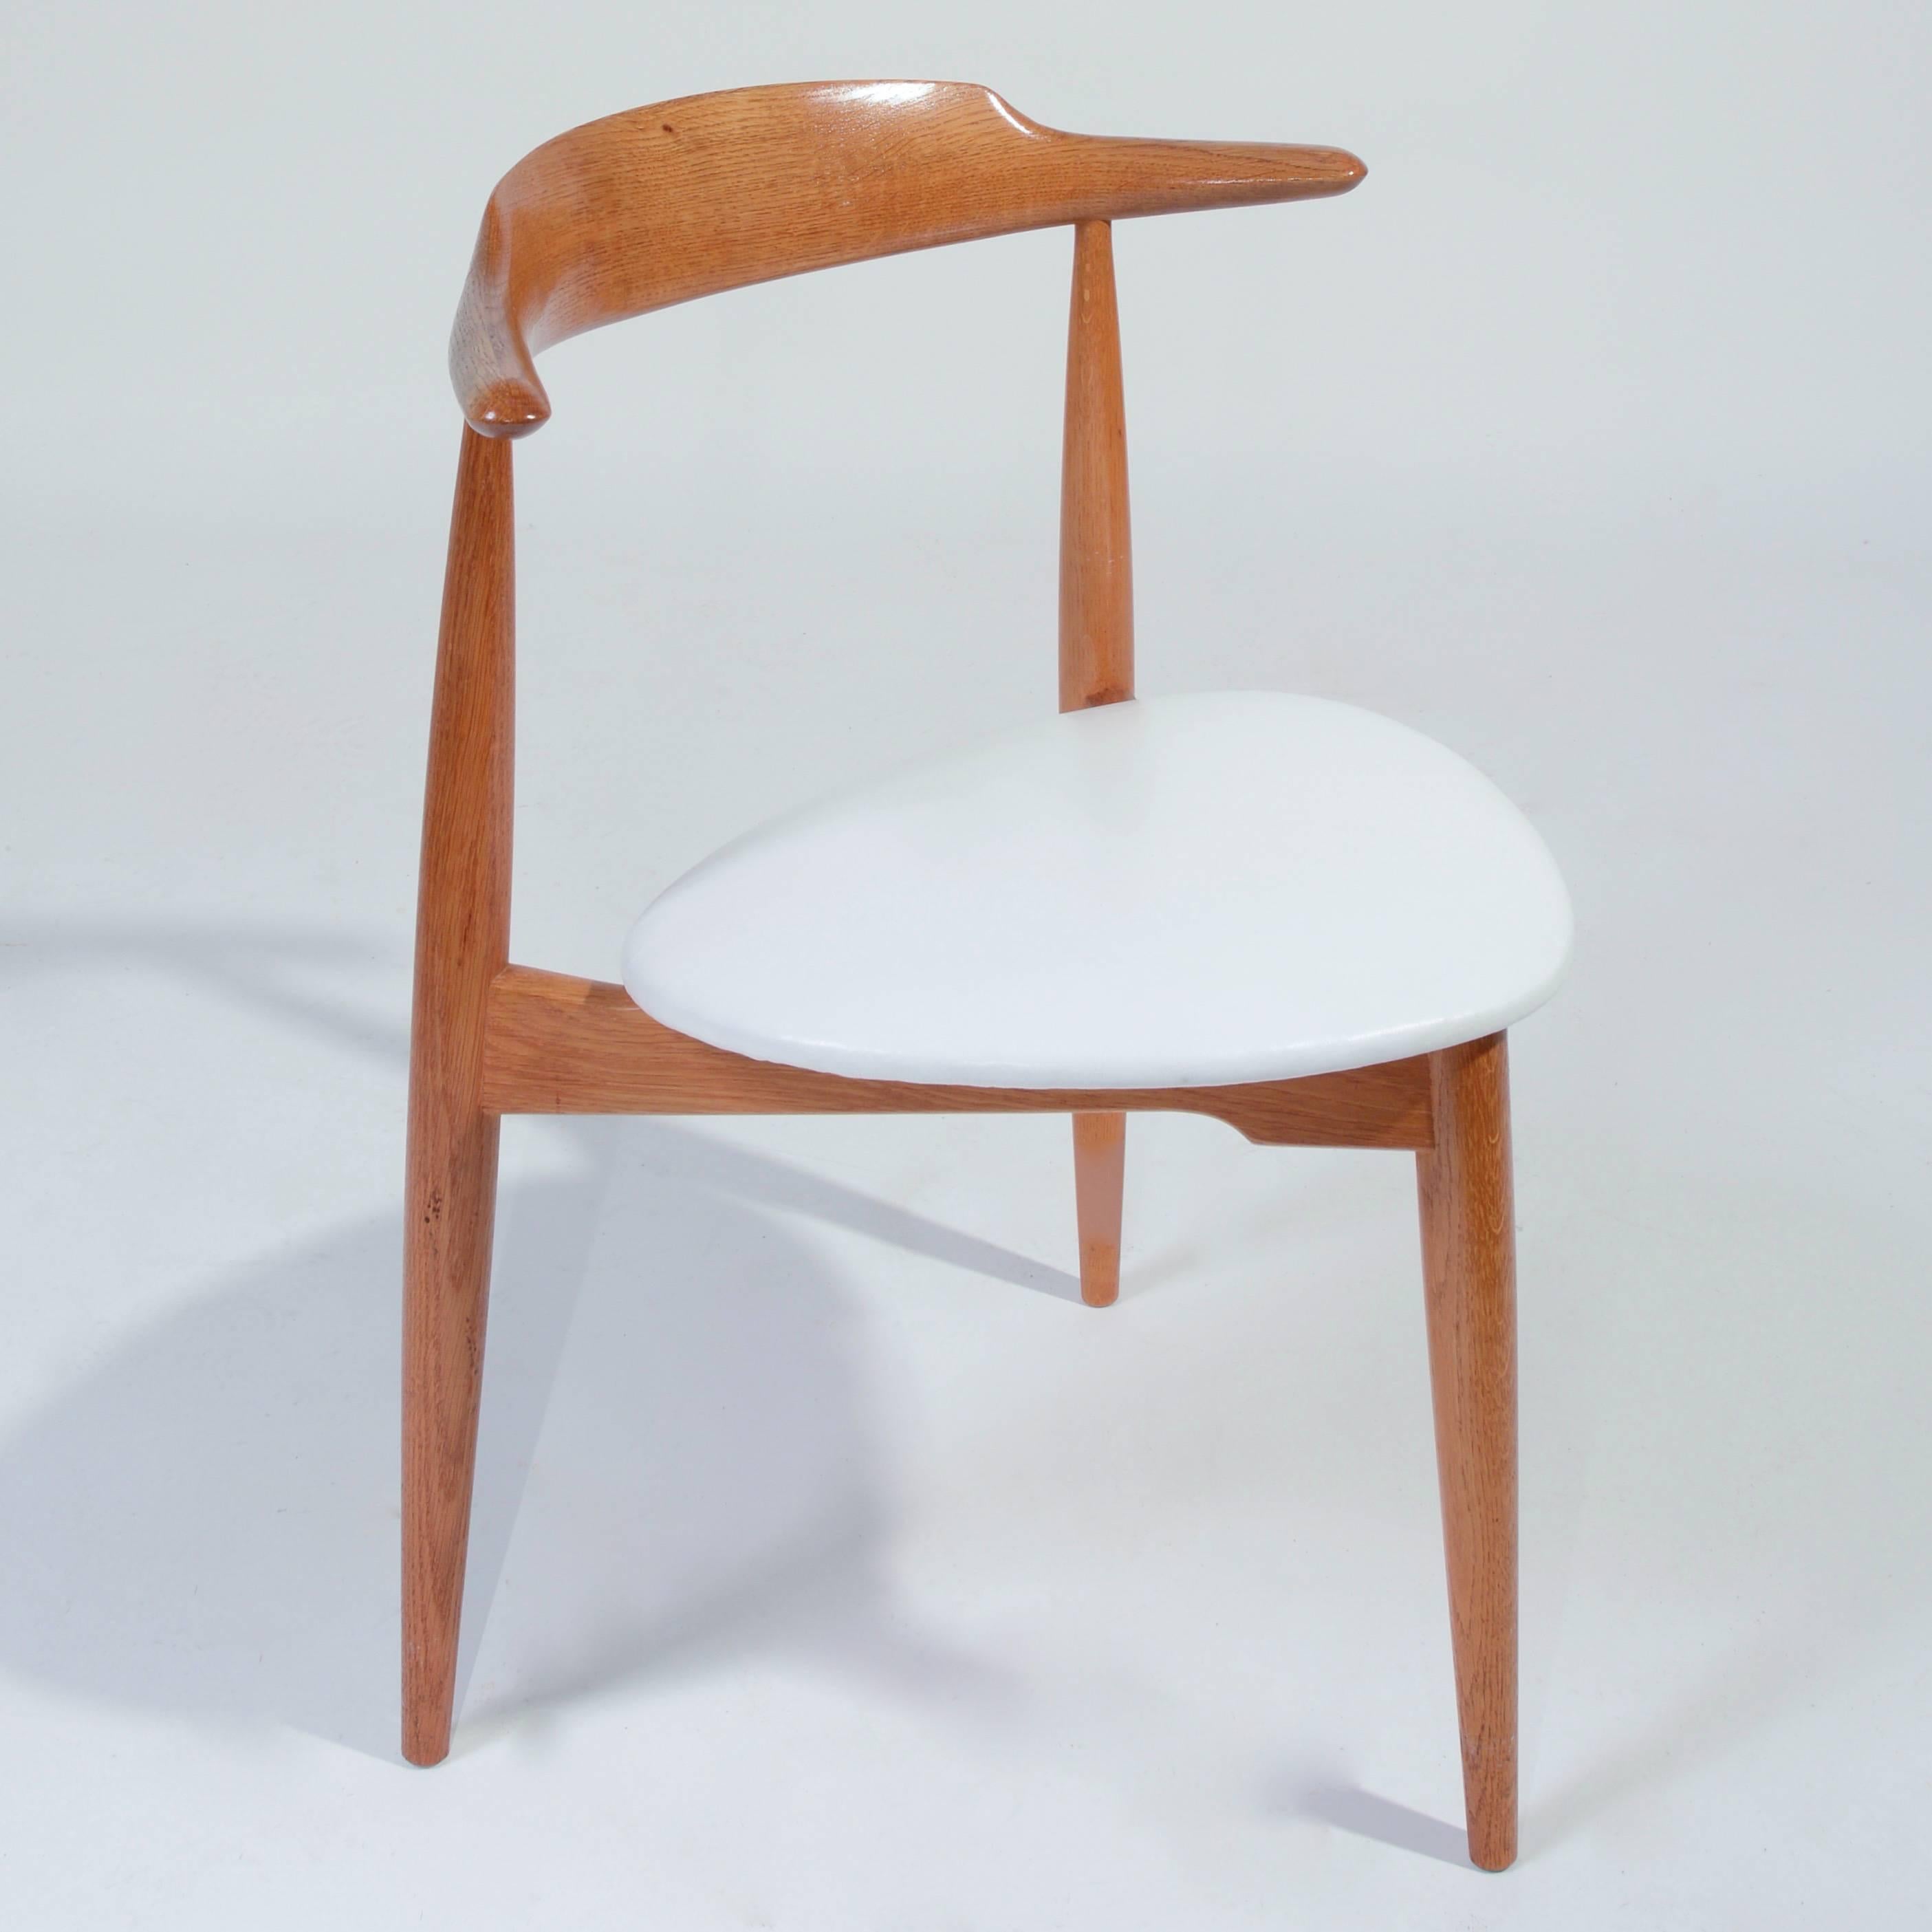 Heart chair in oak with white leather seat by Hans Wegner for Fritz Hansen.